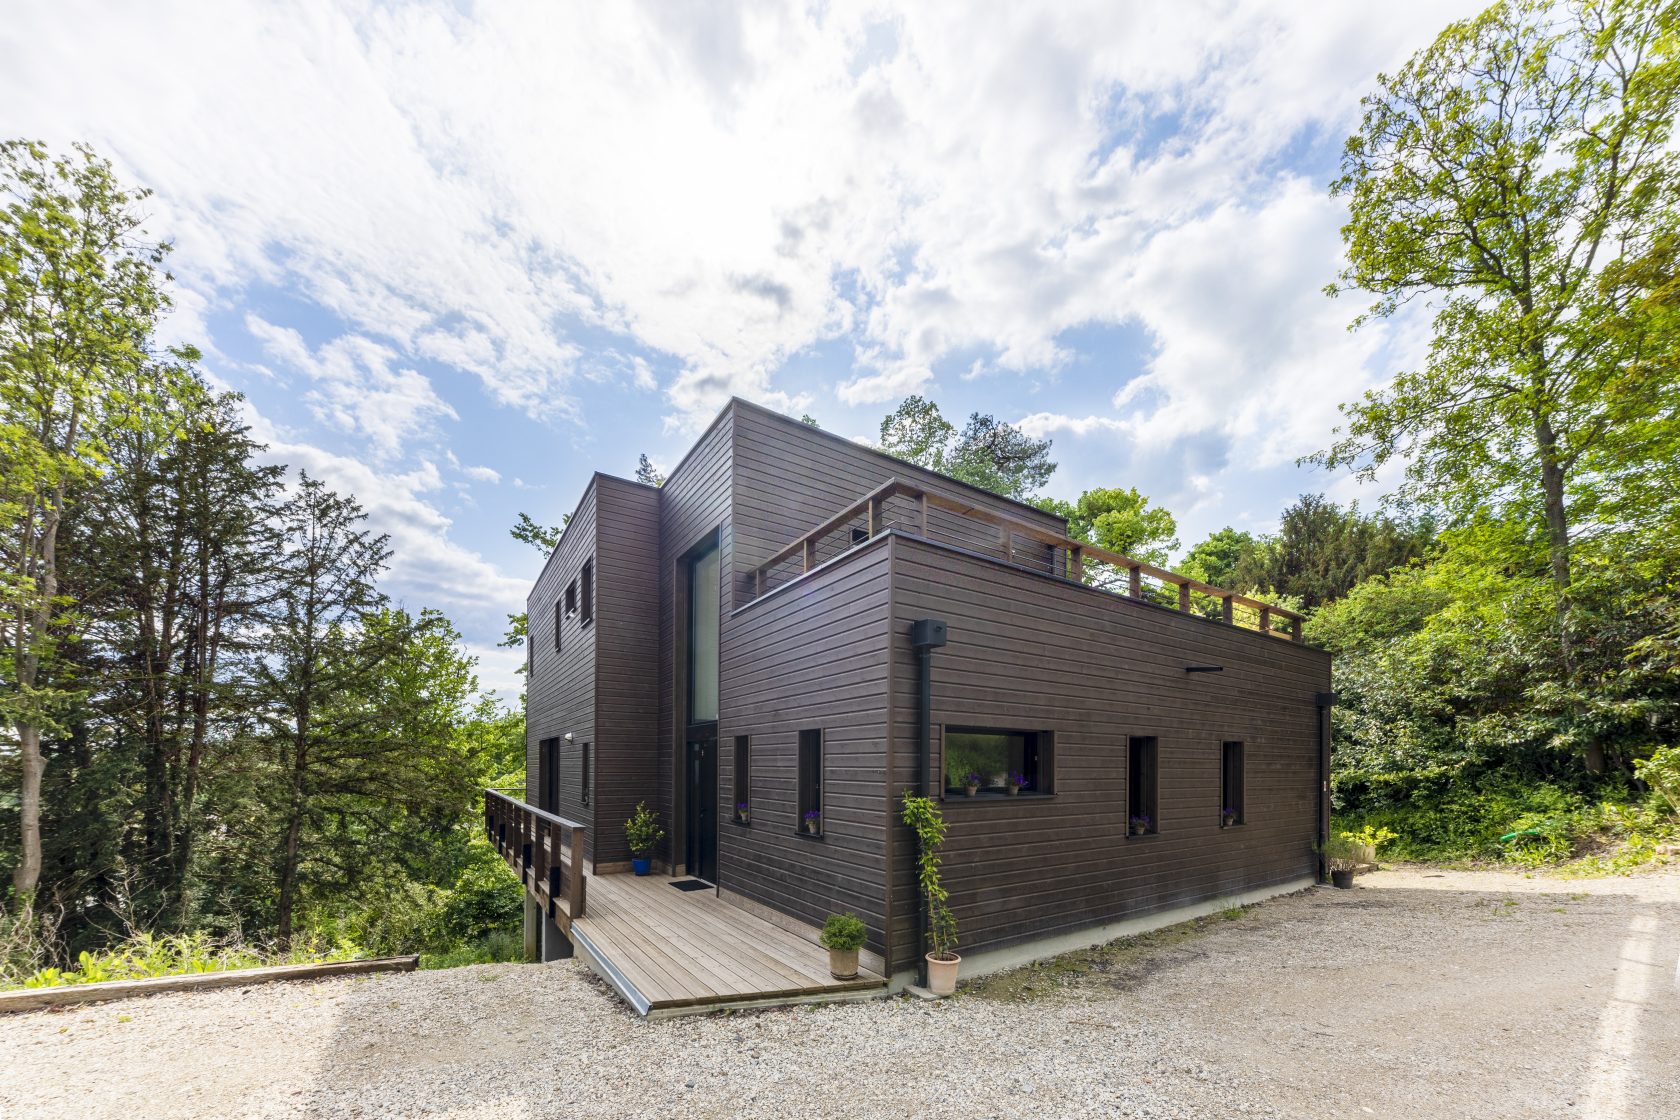 New architect’s villa / bio climatic with wooden frame – See life in GREEN